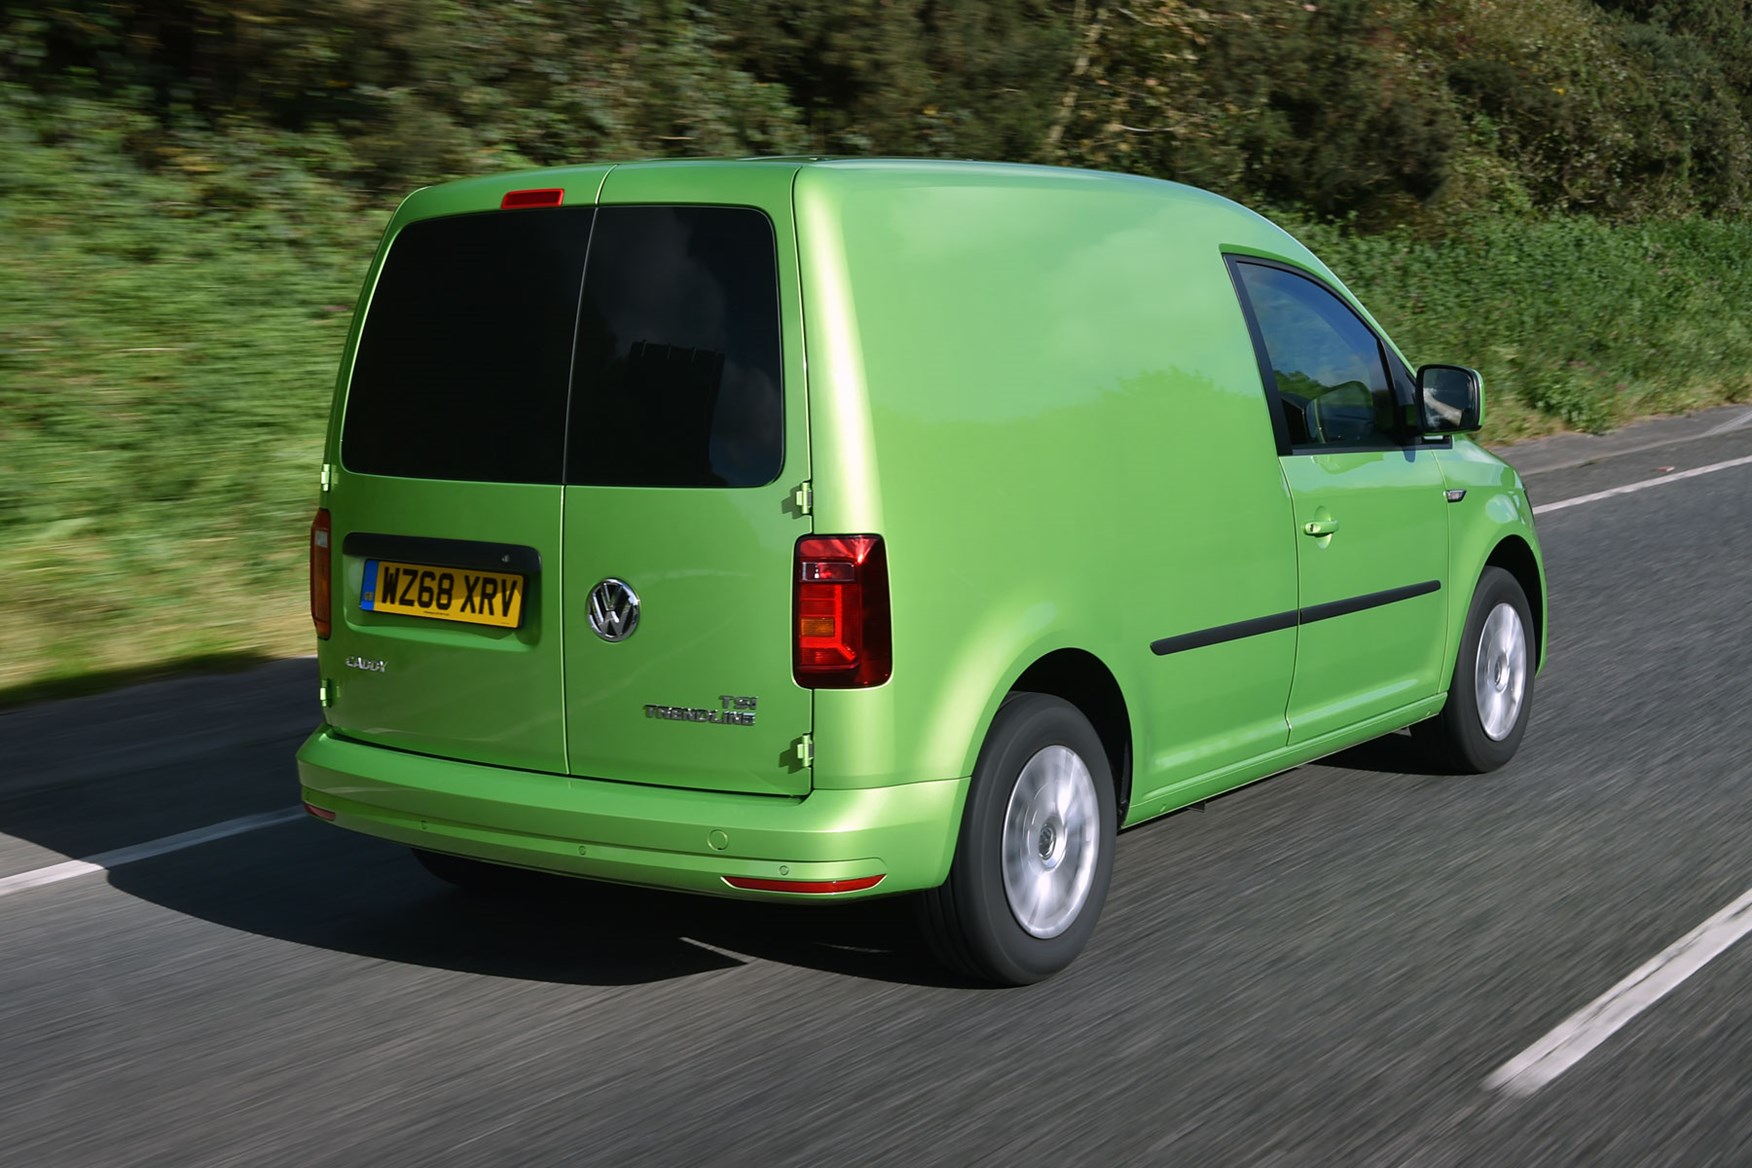 VW Caddy review - 2018 model, rear view, driving, green